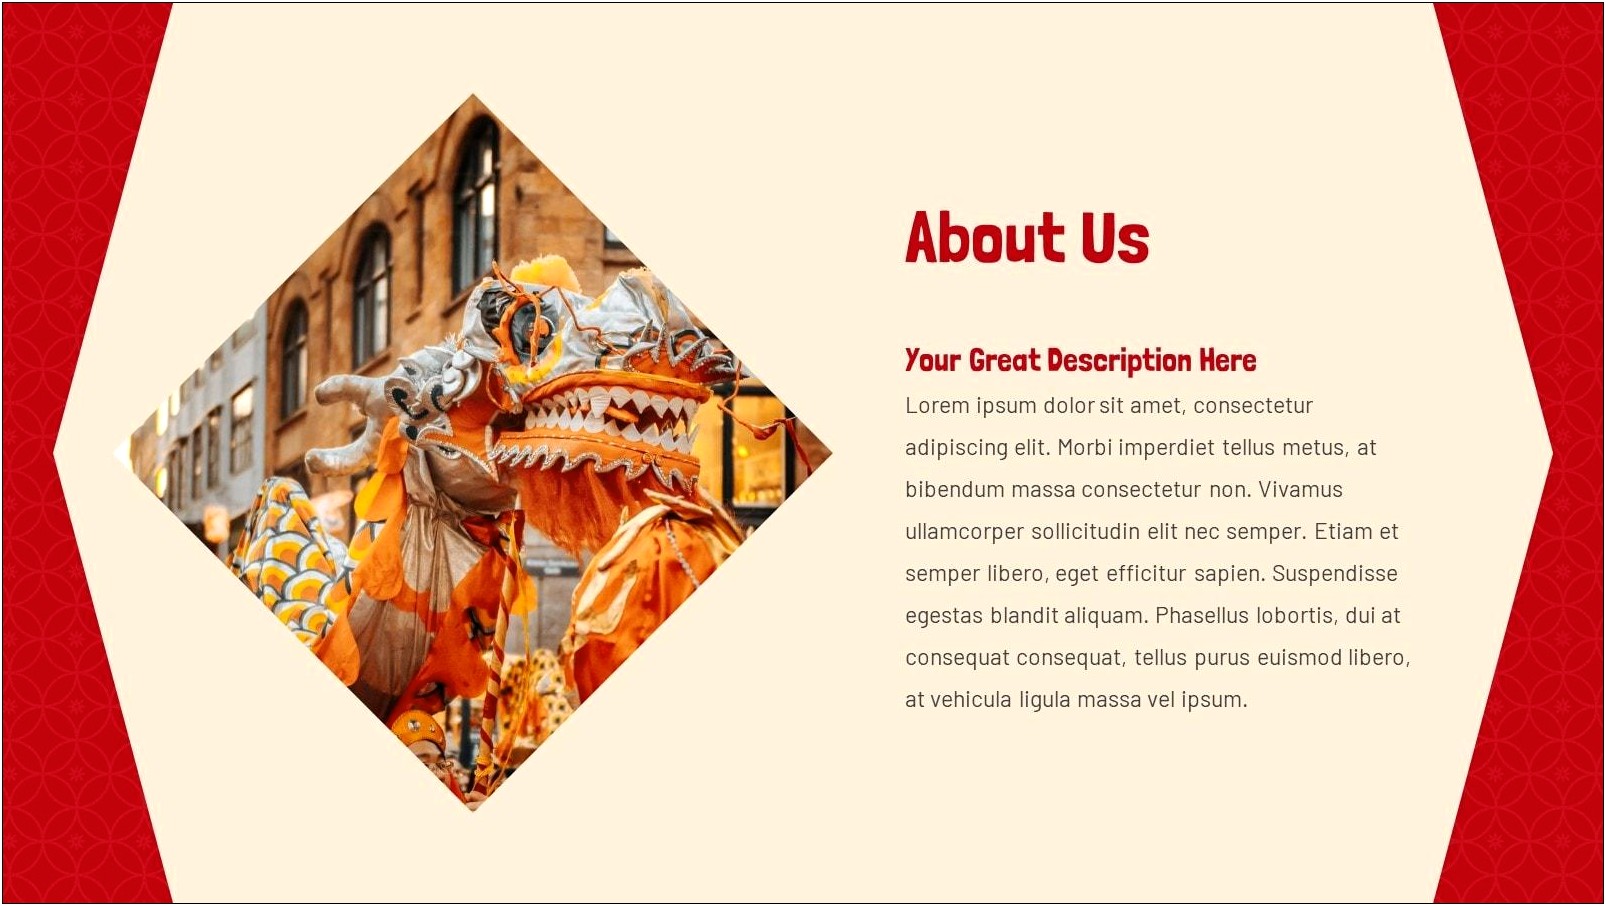 Chinese New Year Free Presentation Templates